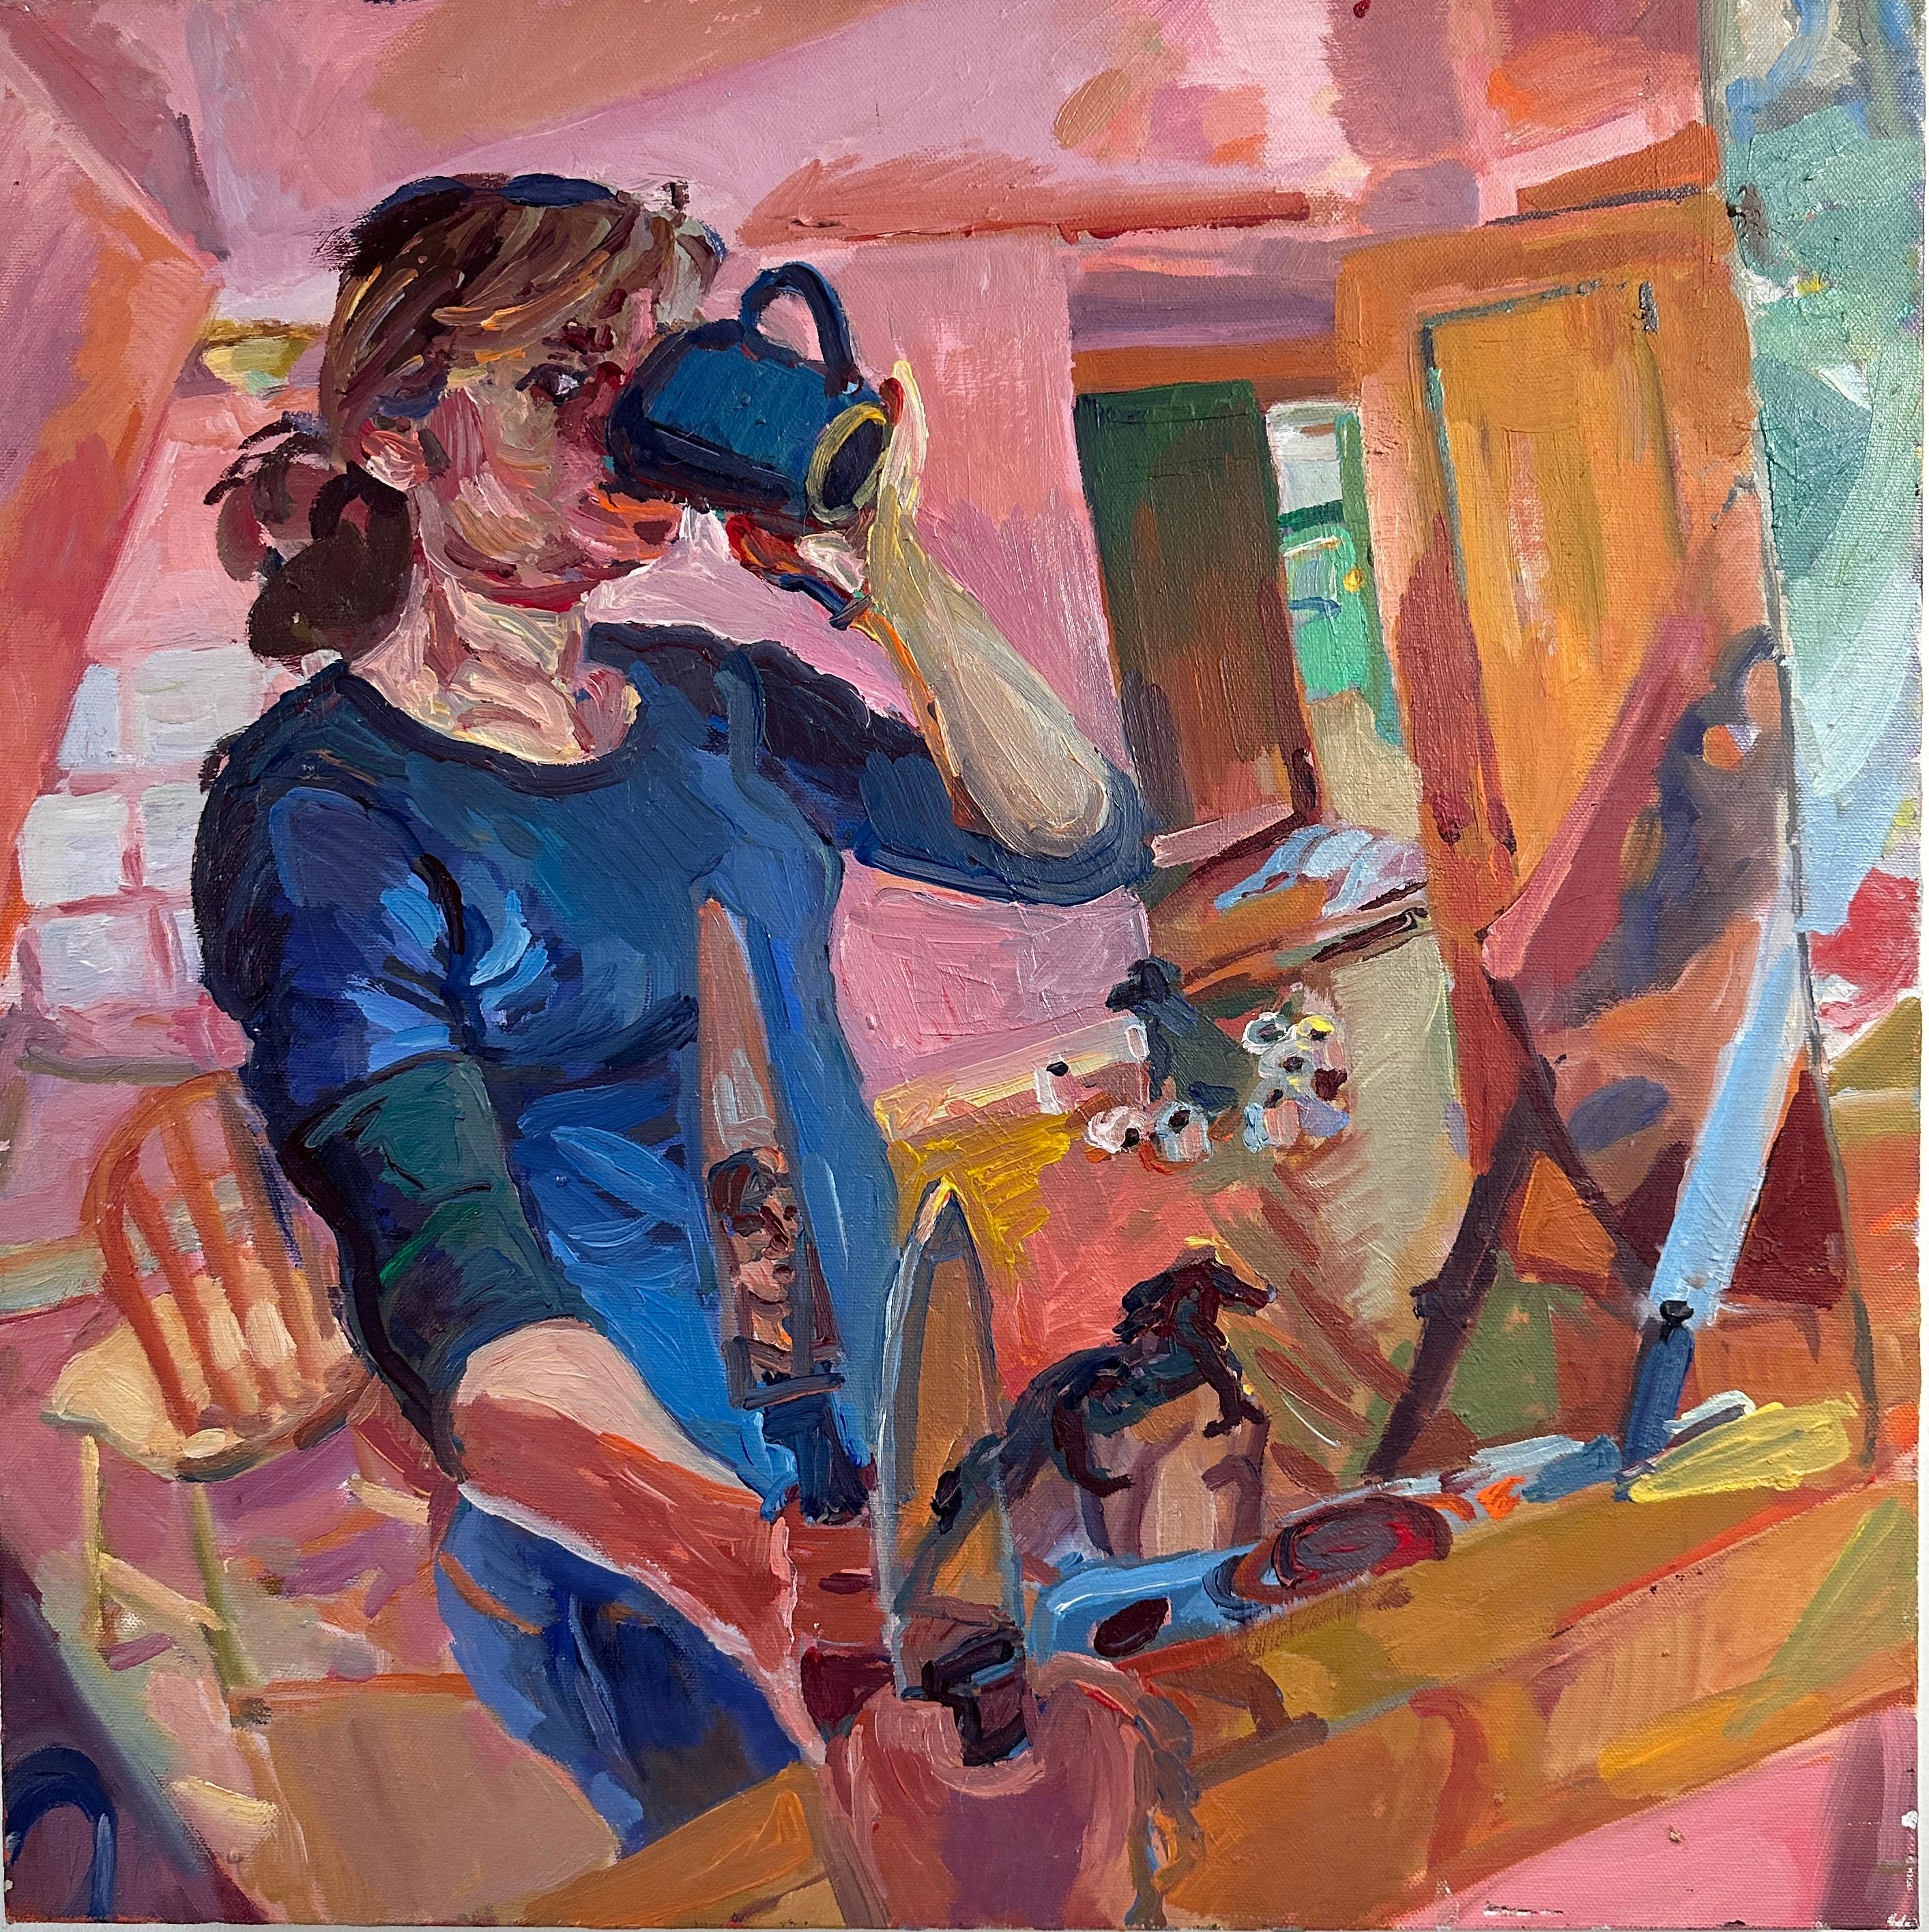 Multiple Reflections w/ a cup of Joe, contemporary, pink, blue, female, cubist 